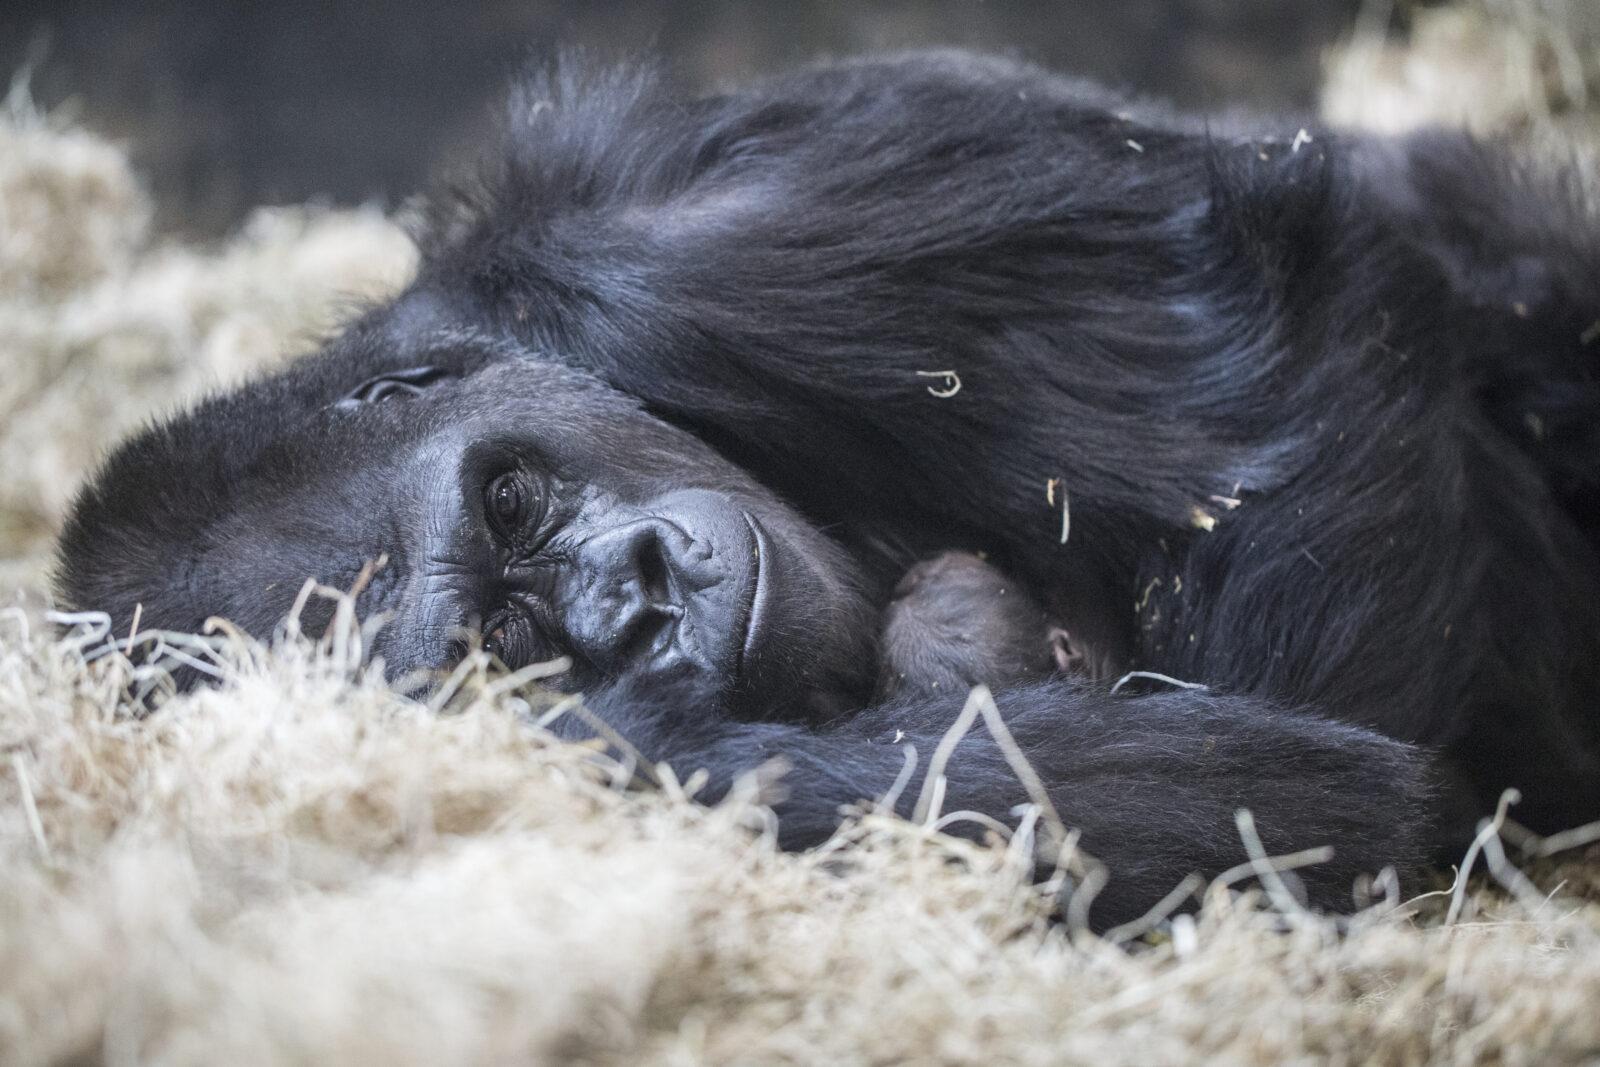 Bana was a great mother, Lincoln Park Zoo officials said. Here she's pictured with son Djeke in 2019. (Christopher Bijalba / Lincoln Park Zoo)